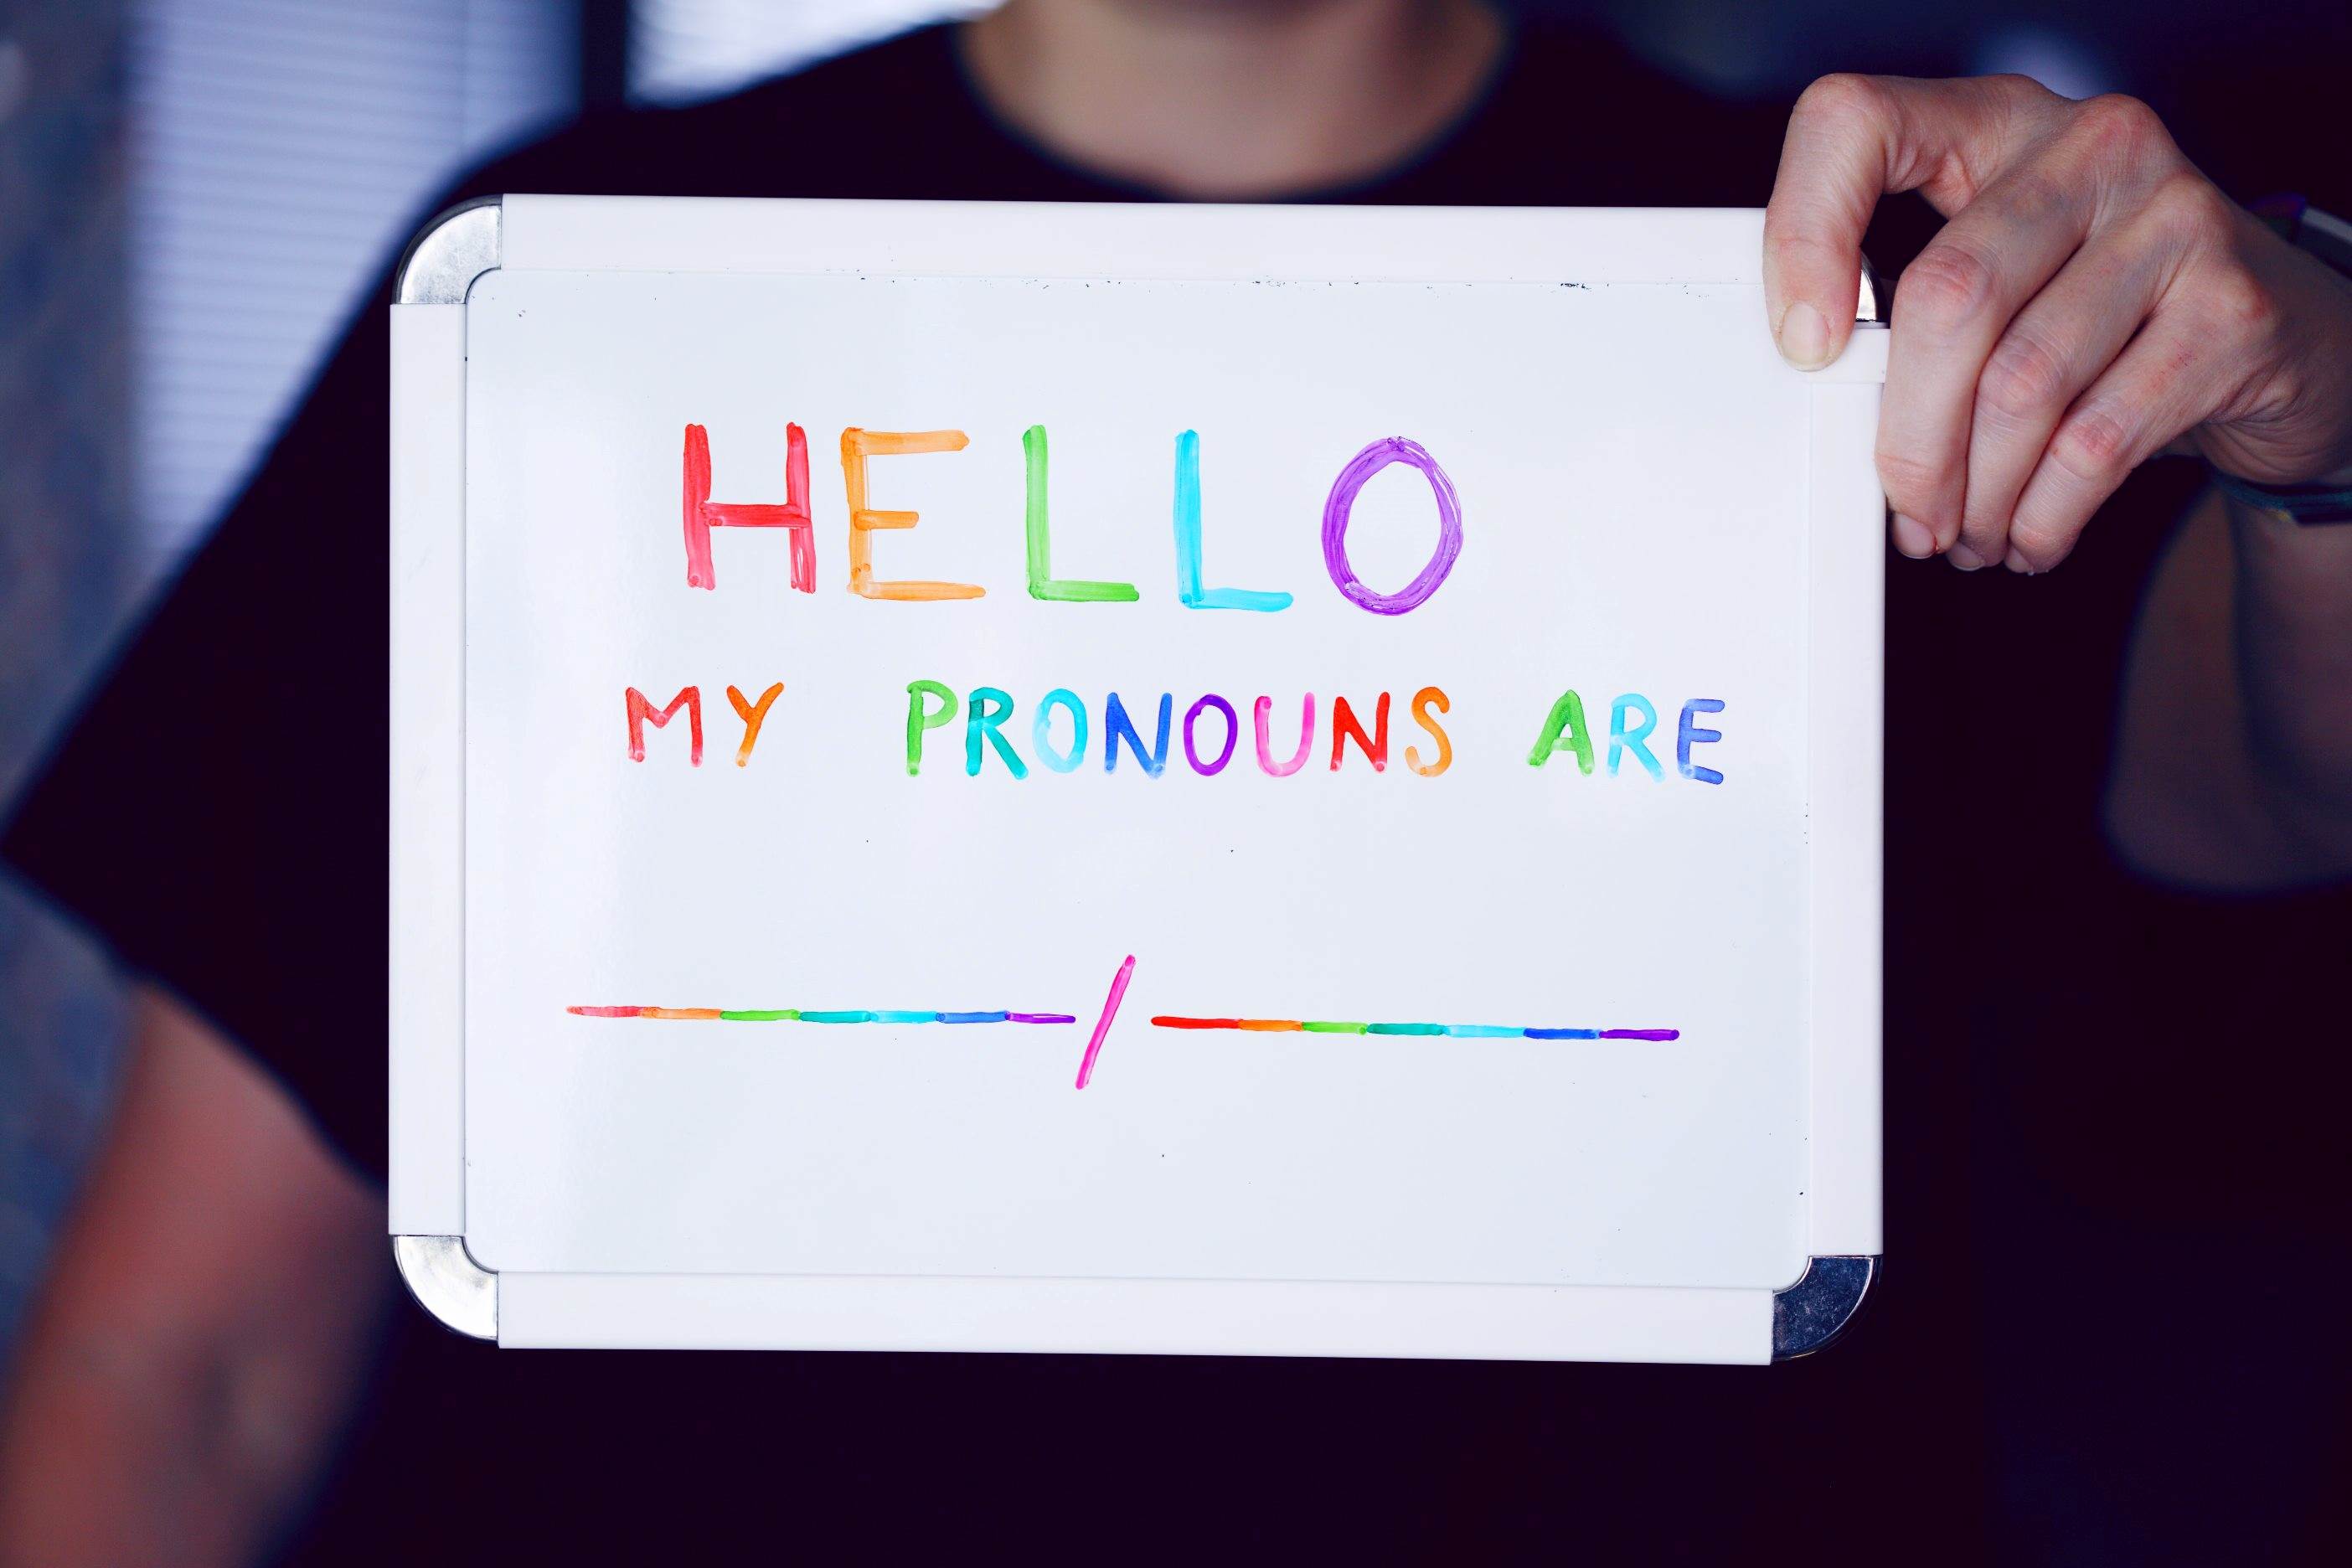 Hello my pronouns are... sign being held up by a person